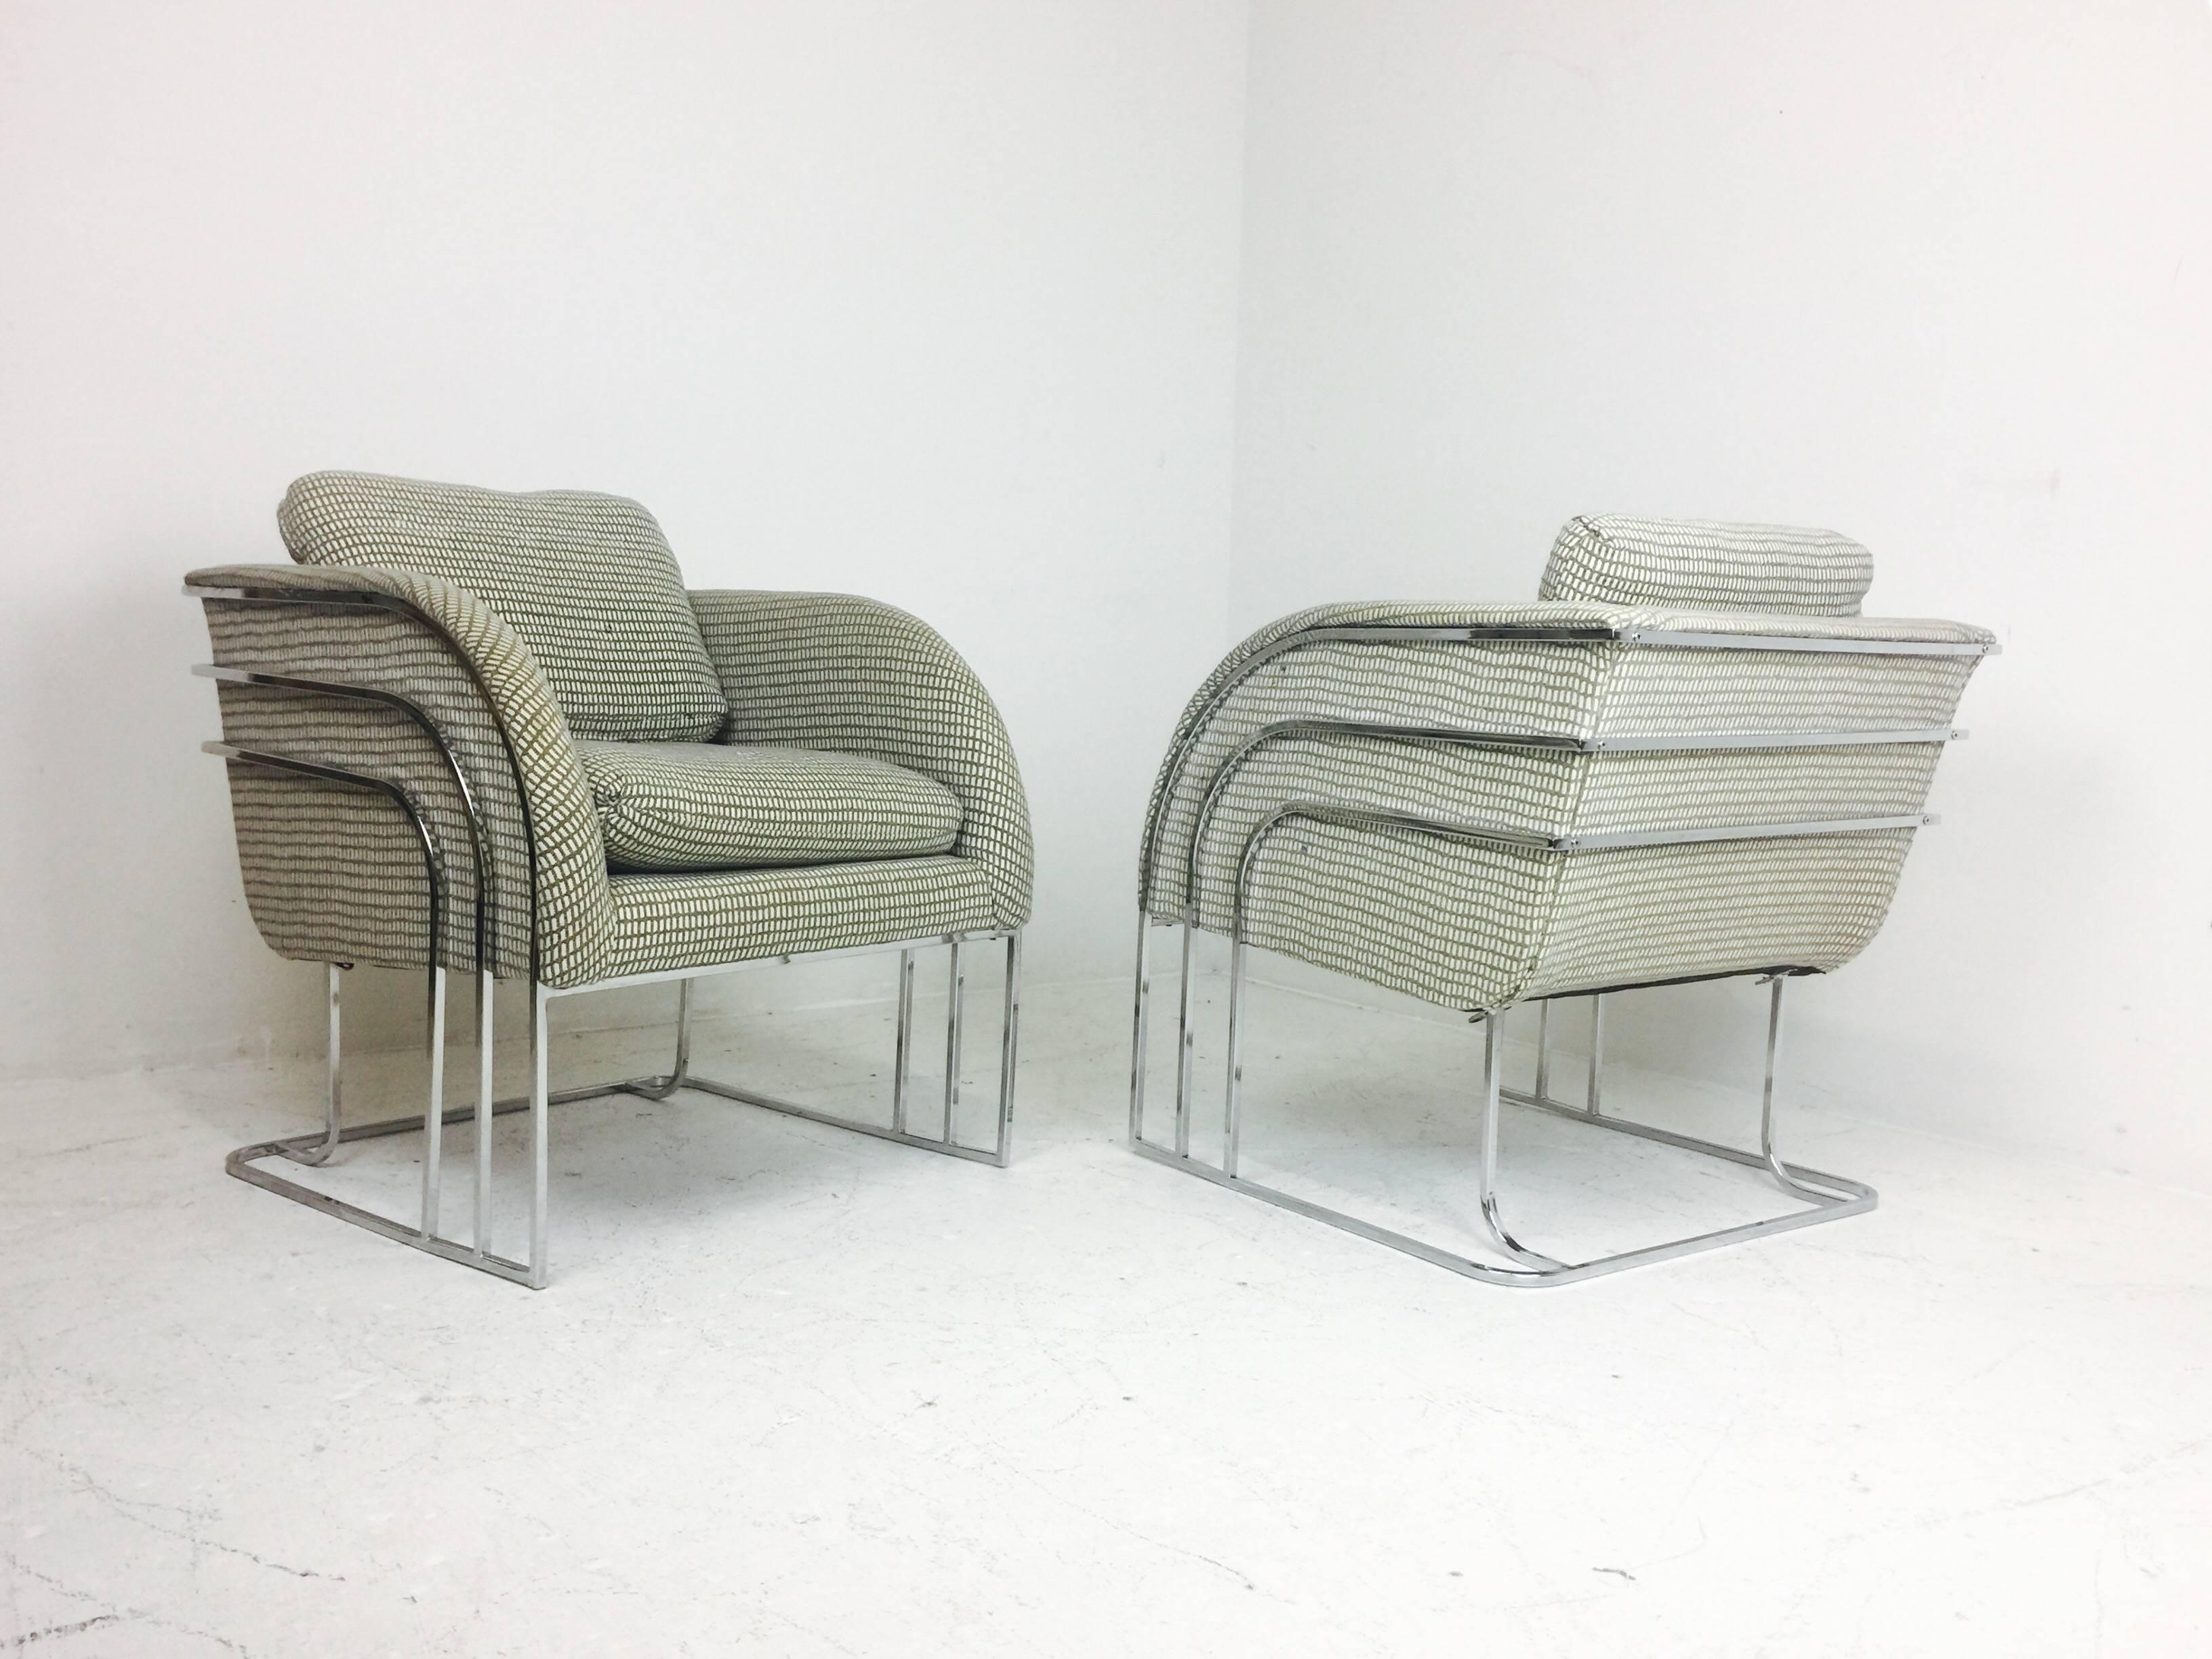 20th Century Pair of Deco Style Chrome Chairs by Milo Baughman